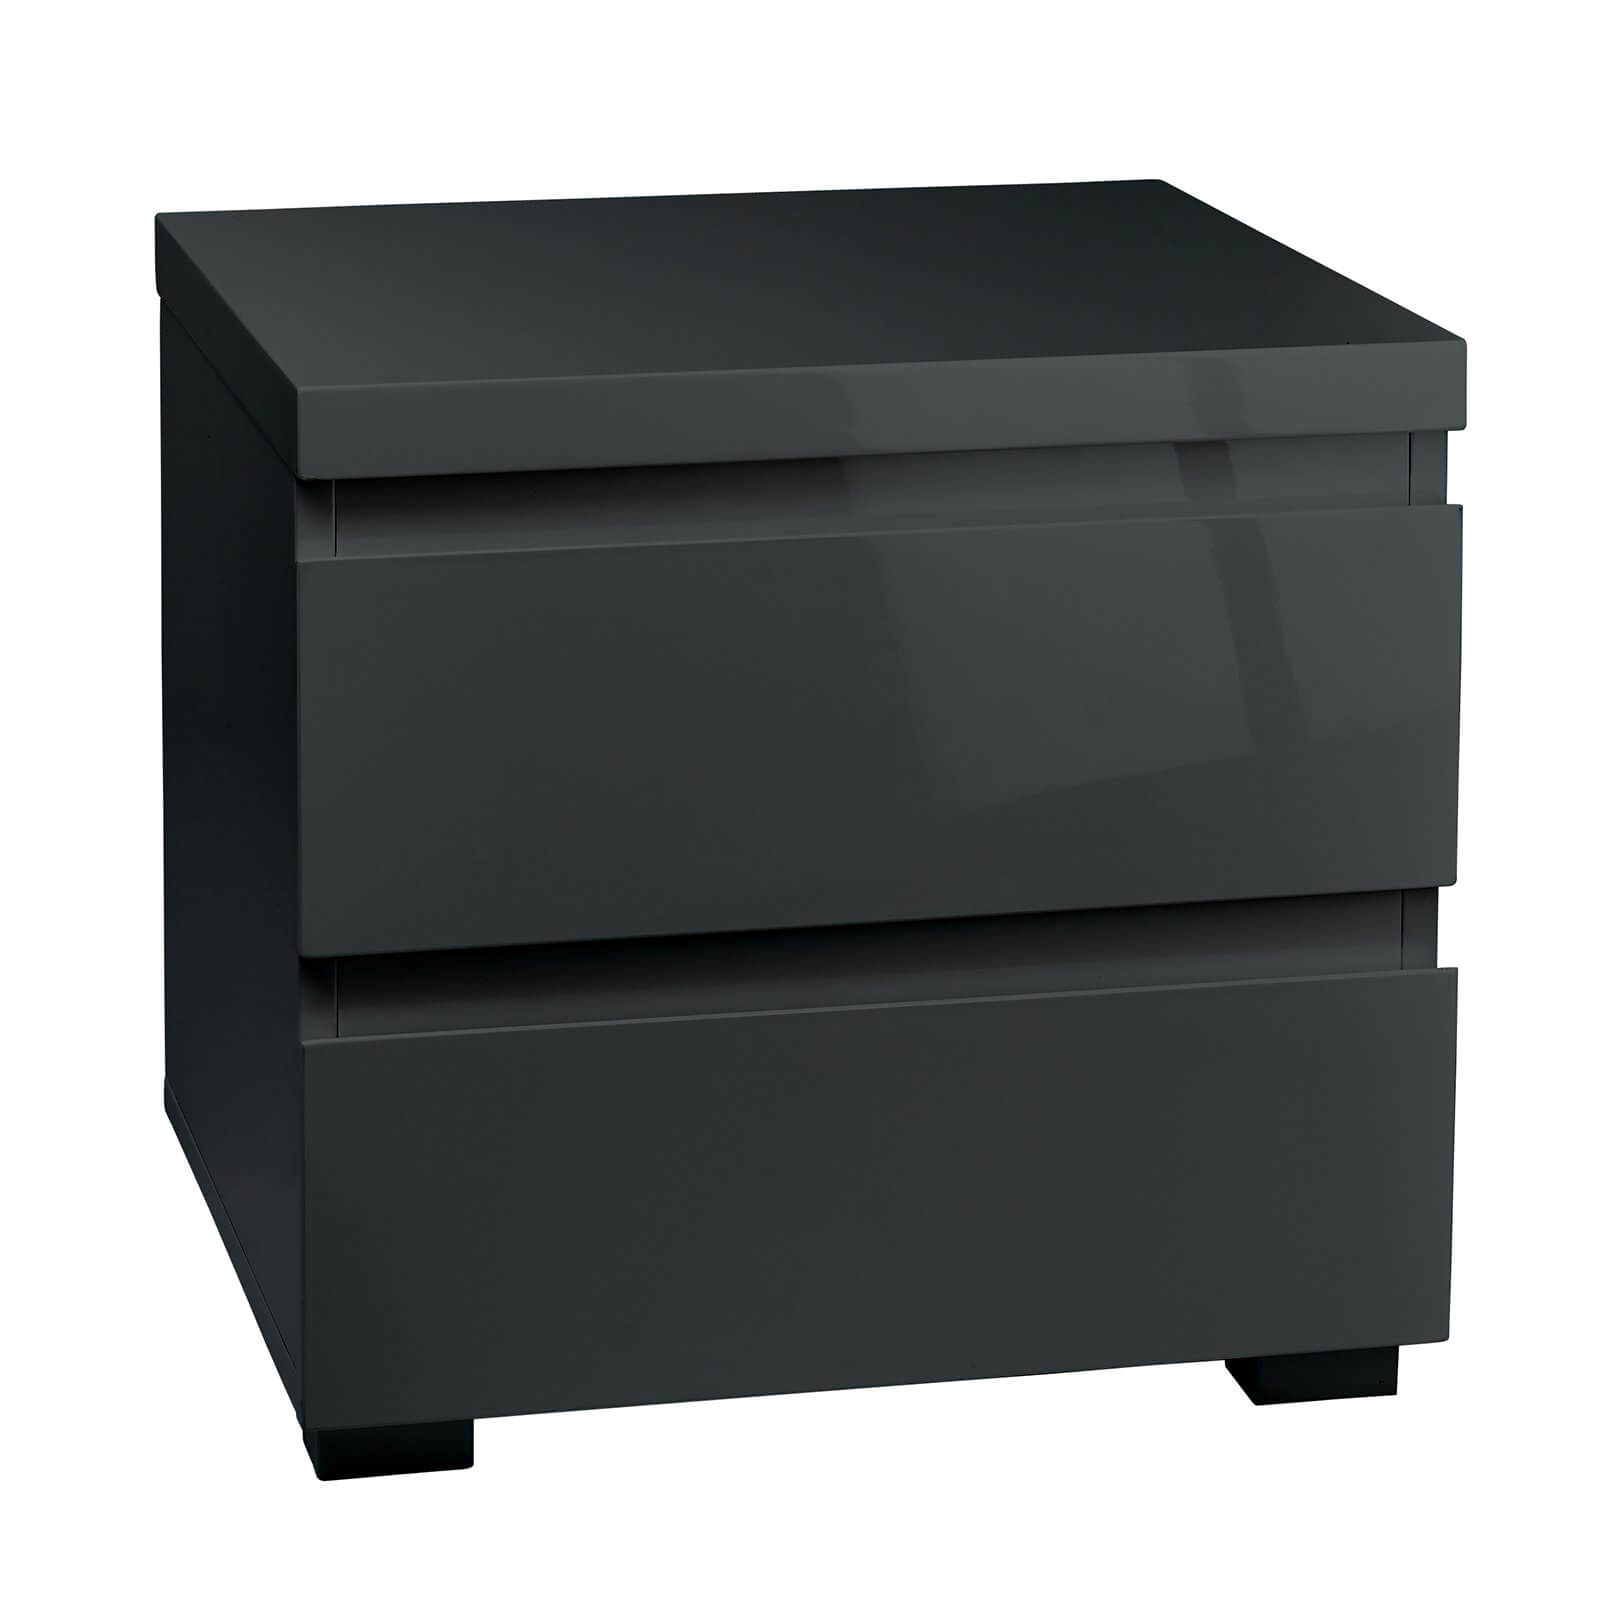 Puro 2 Drawer Bedside Cabinet - Charcoal